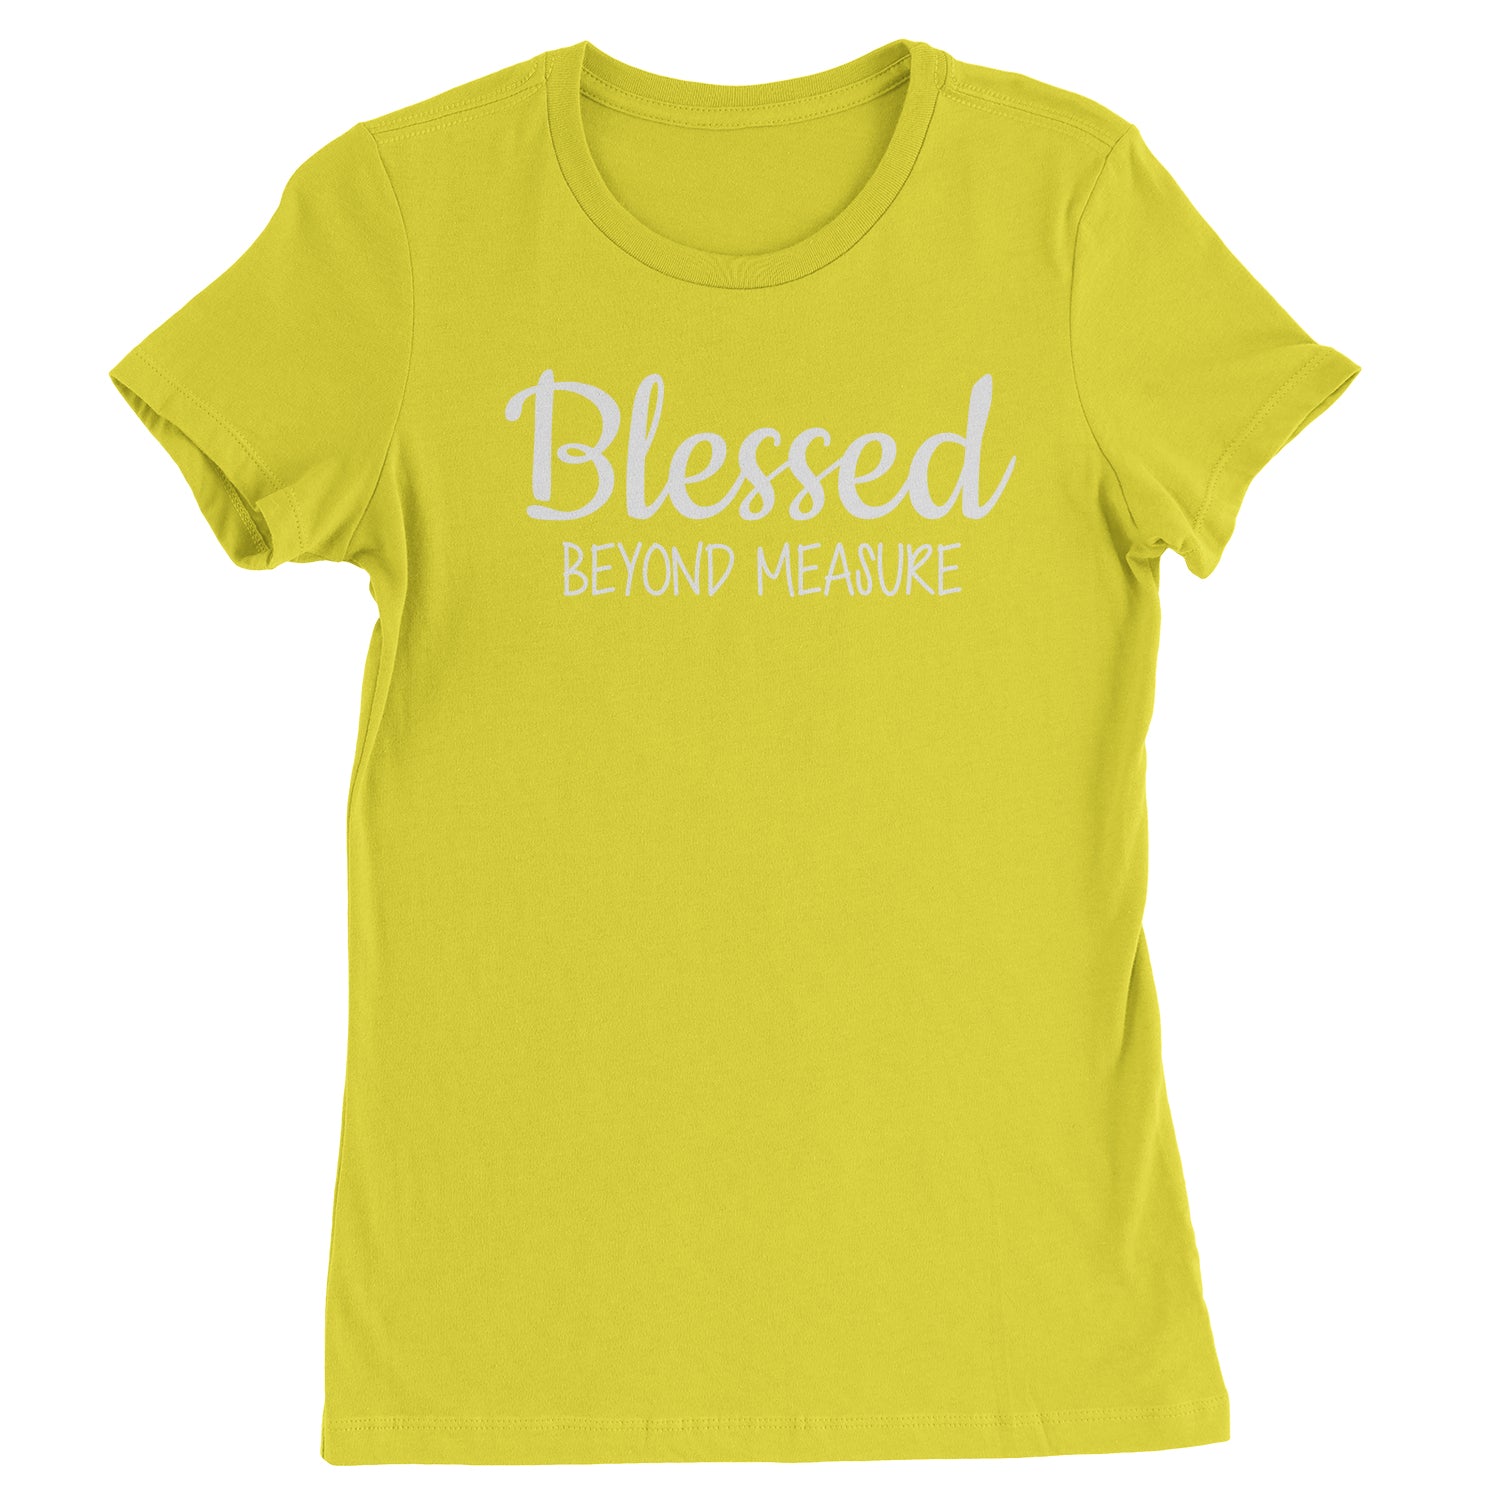 Blessed Beyond Measure Womens T-shirt blessed, face, look by Expression Tees